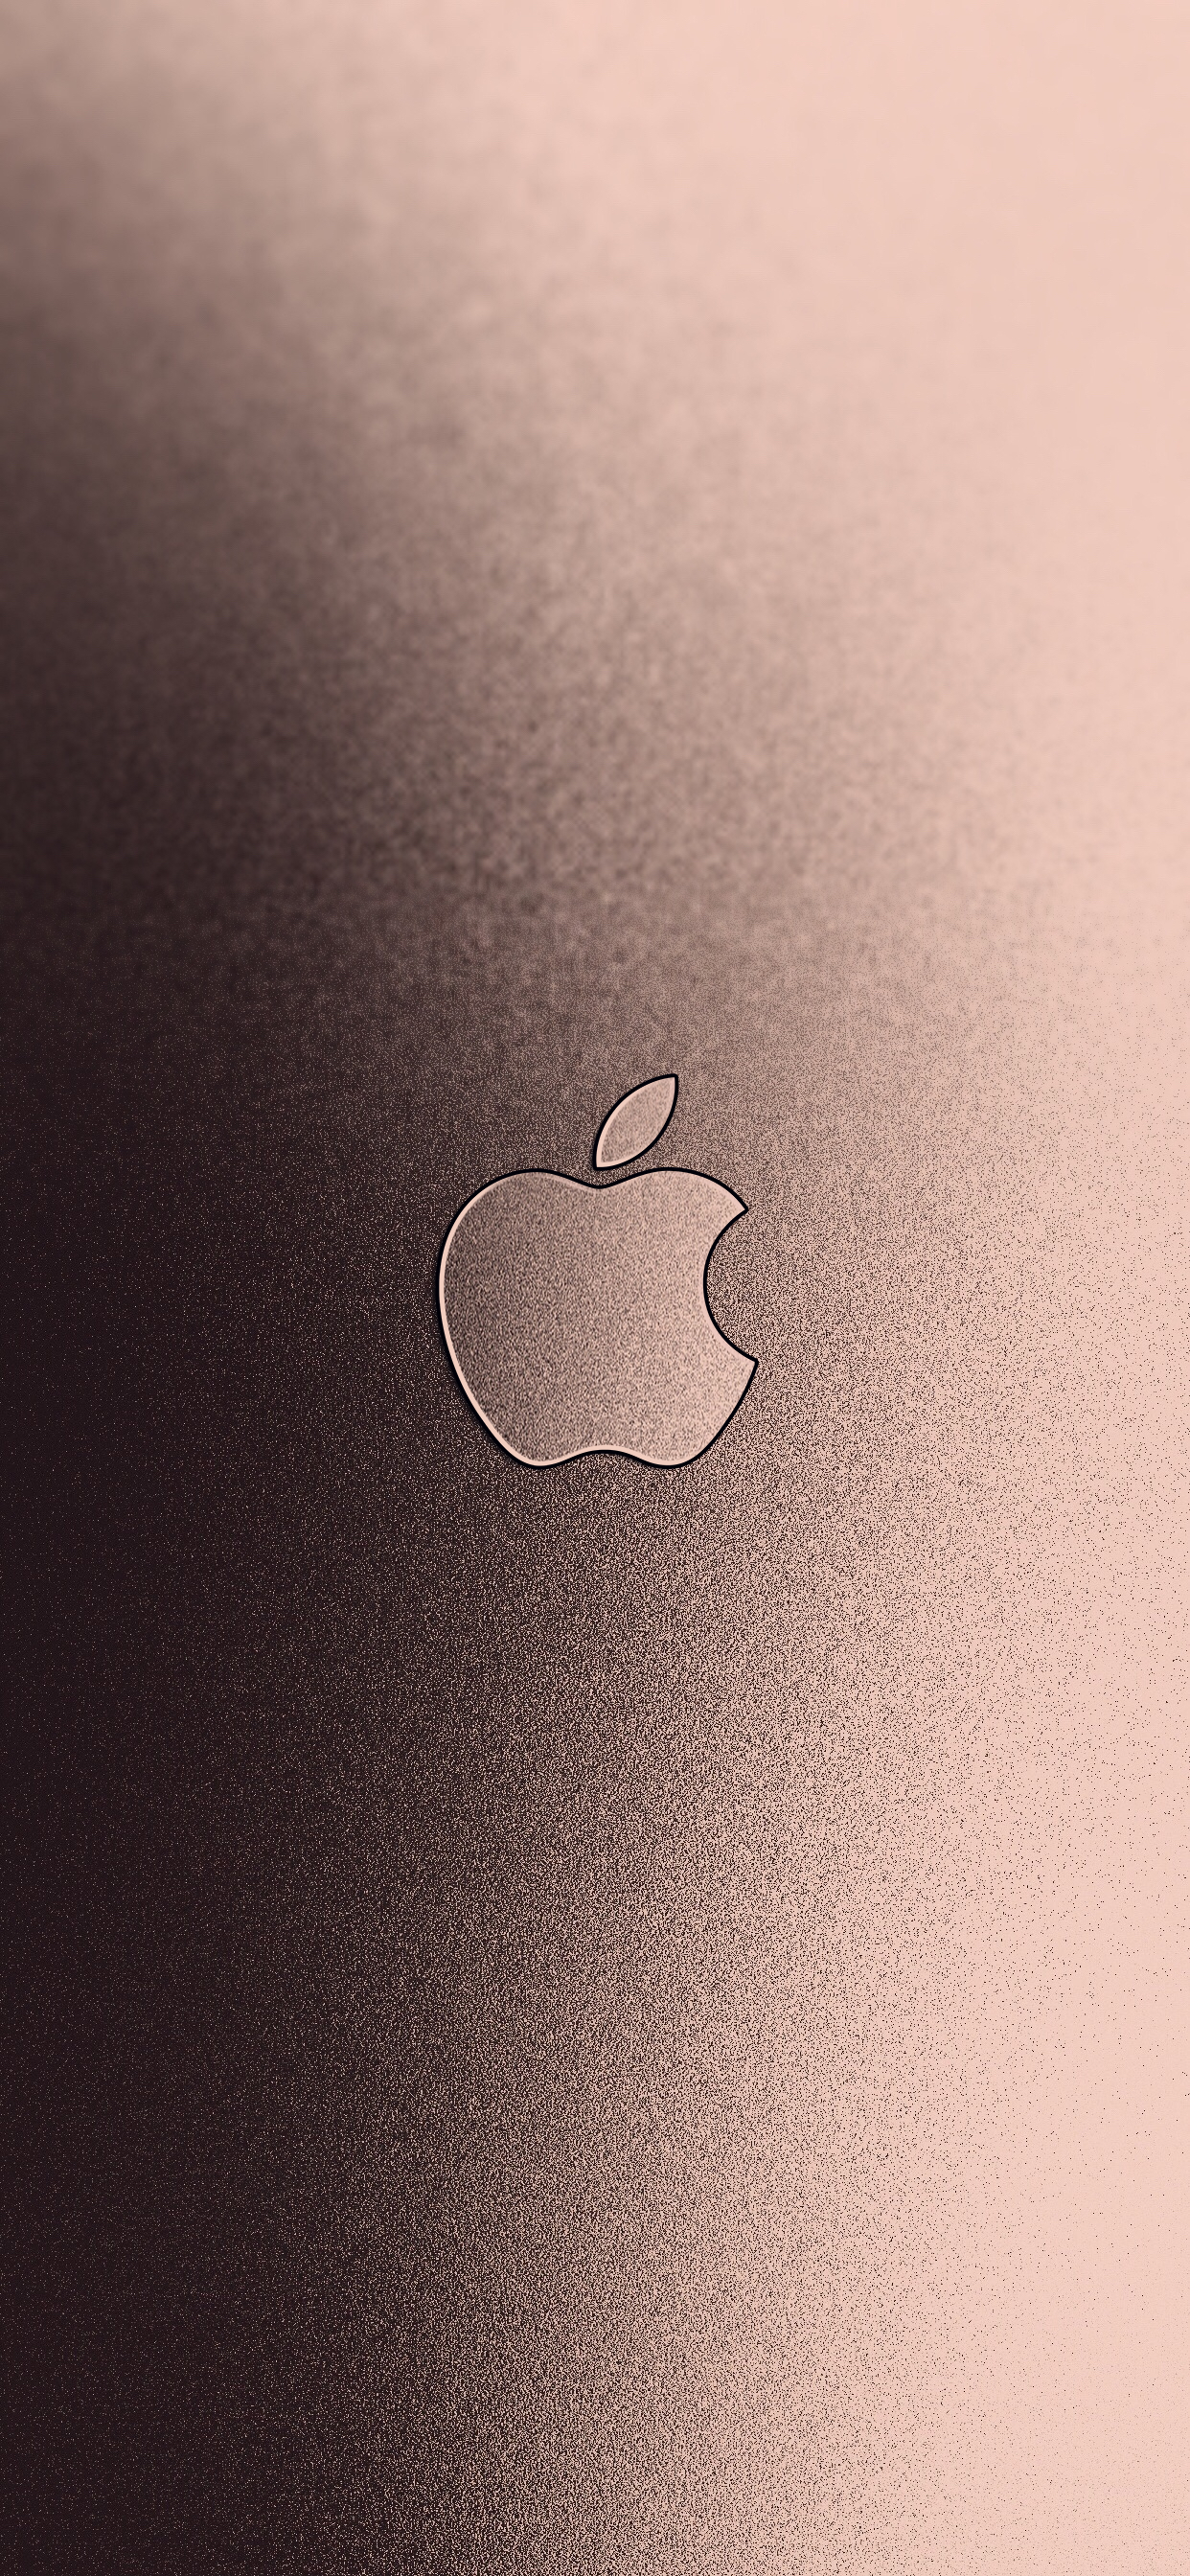 v5 with Apple Logo iPhone XS Max wallpaper ar72014